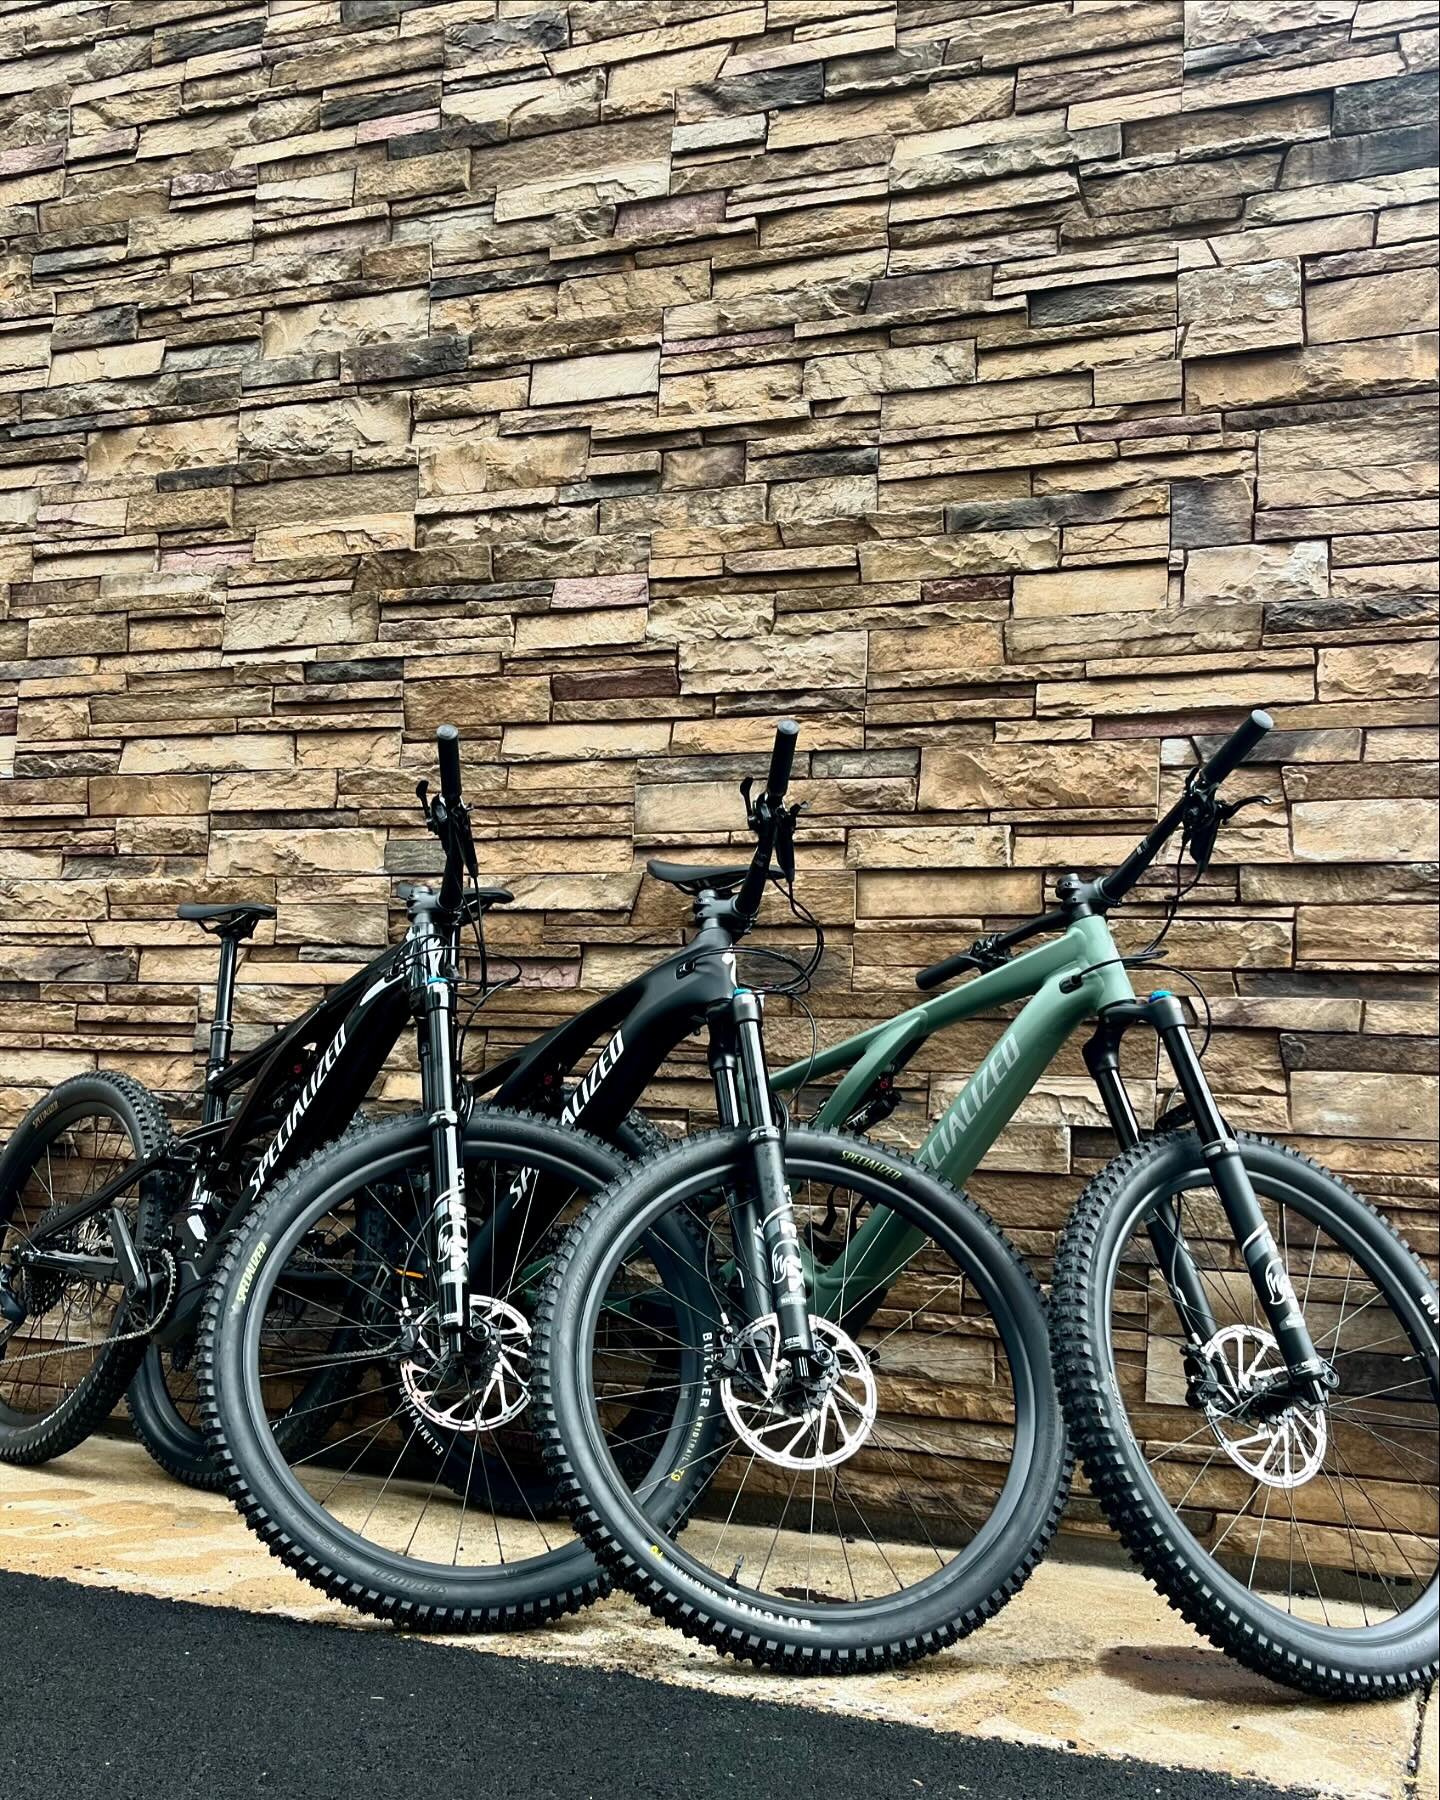 Turbo Levo Demos are ready to ride! Have you been thinking about buying a Specialized Levo? Well now you have a chance to try it before you buy it! Come take one of our Levo&rsquo;s out for a day or even a week! $100/day and up to $300 will be put to